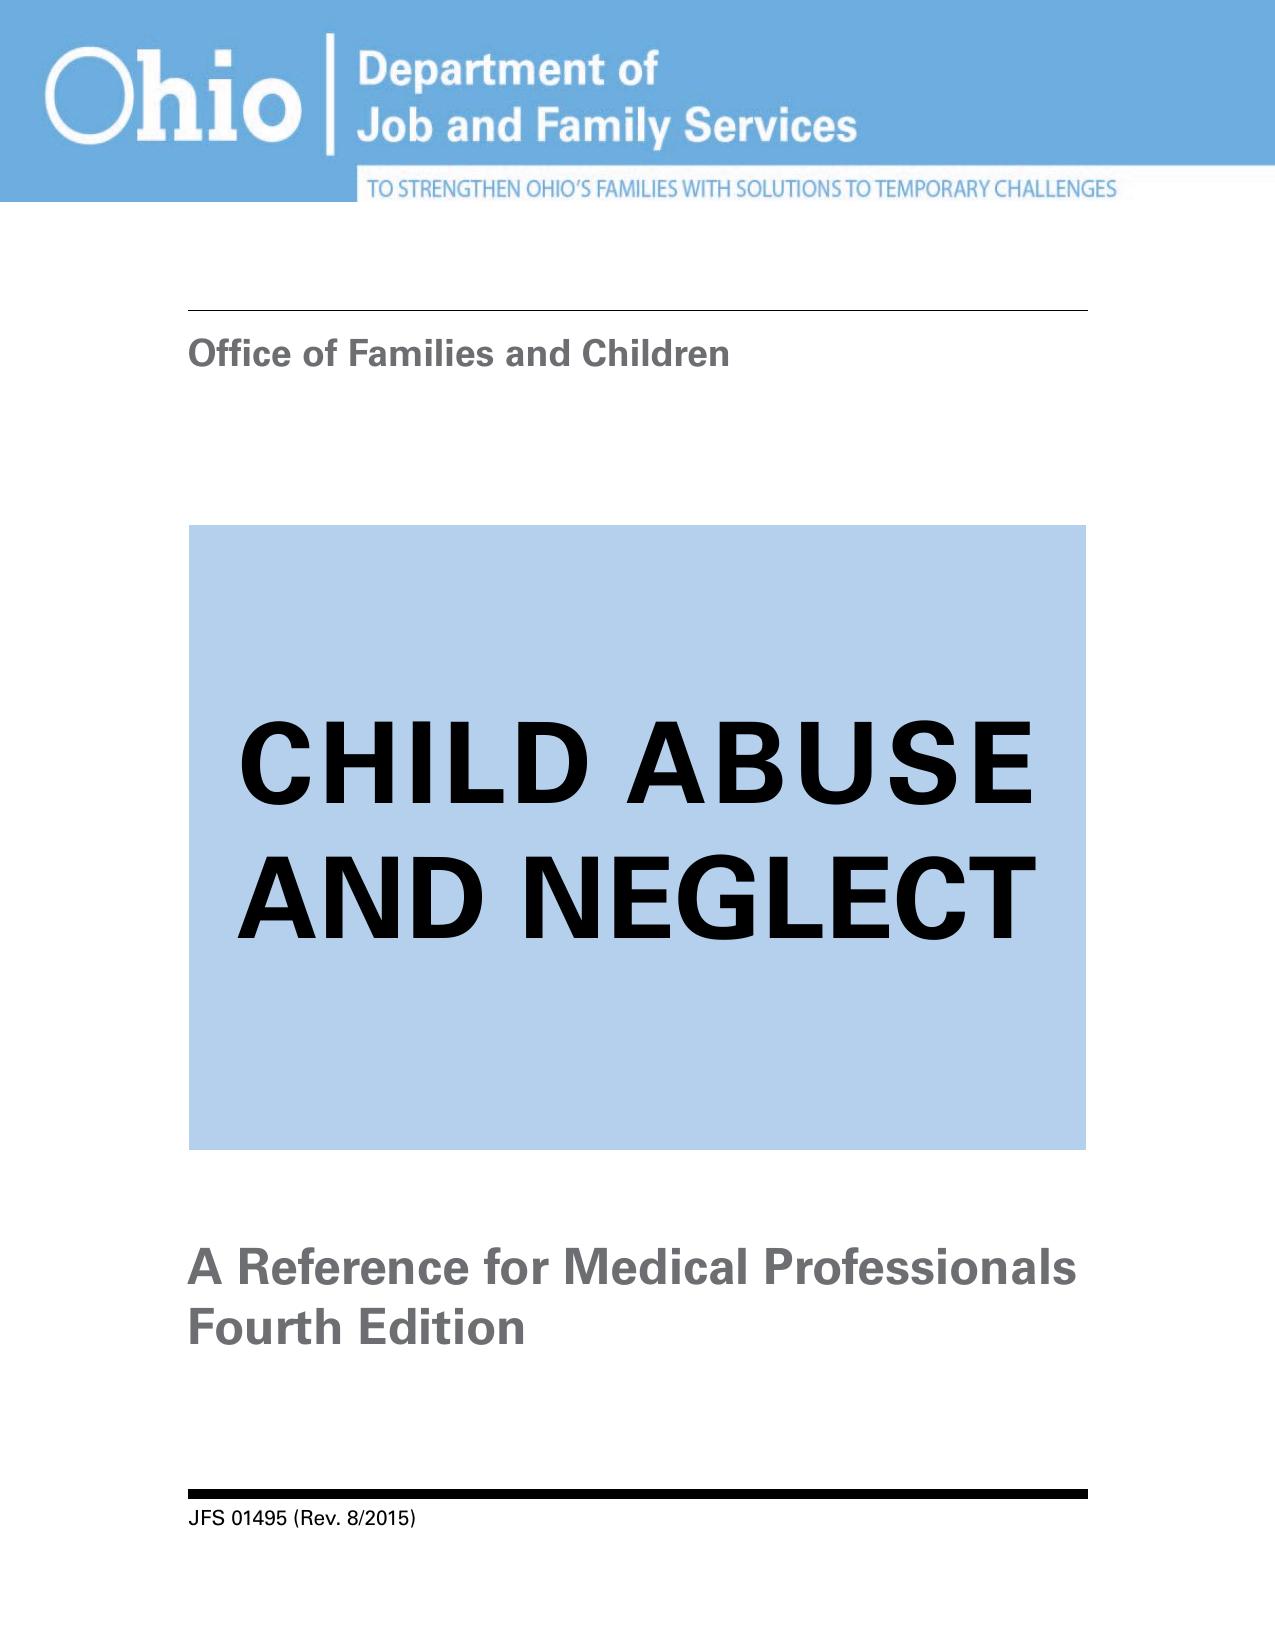 Child Abuse and Neglect 4th ed 2015